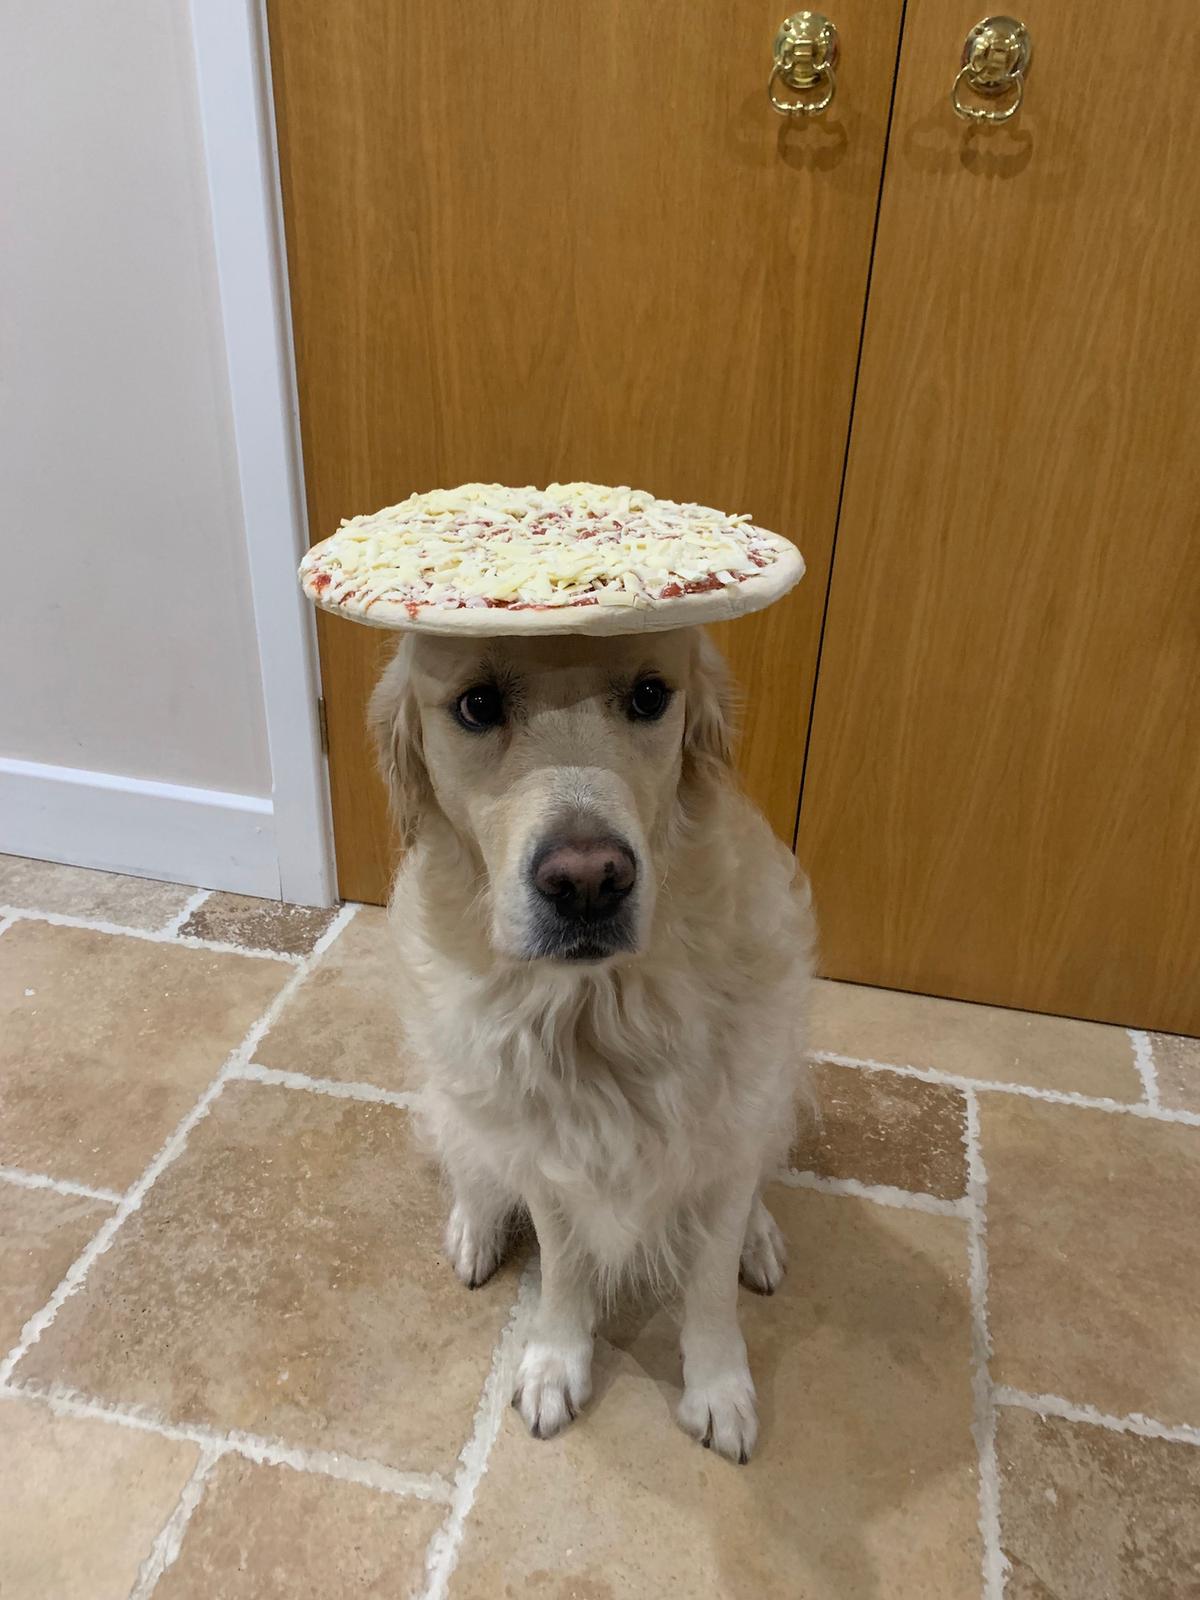 Dexter balancing a frozen pizza on his head. (Courtesy of Caters News)